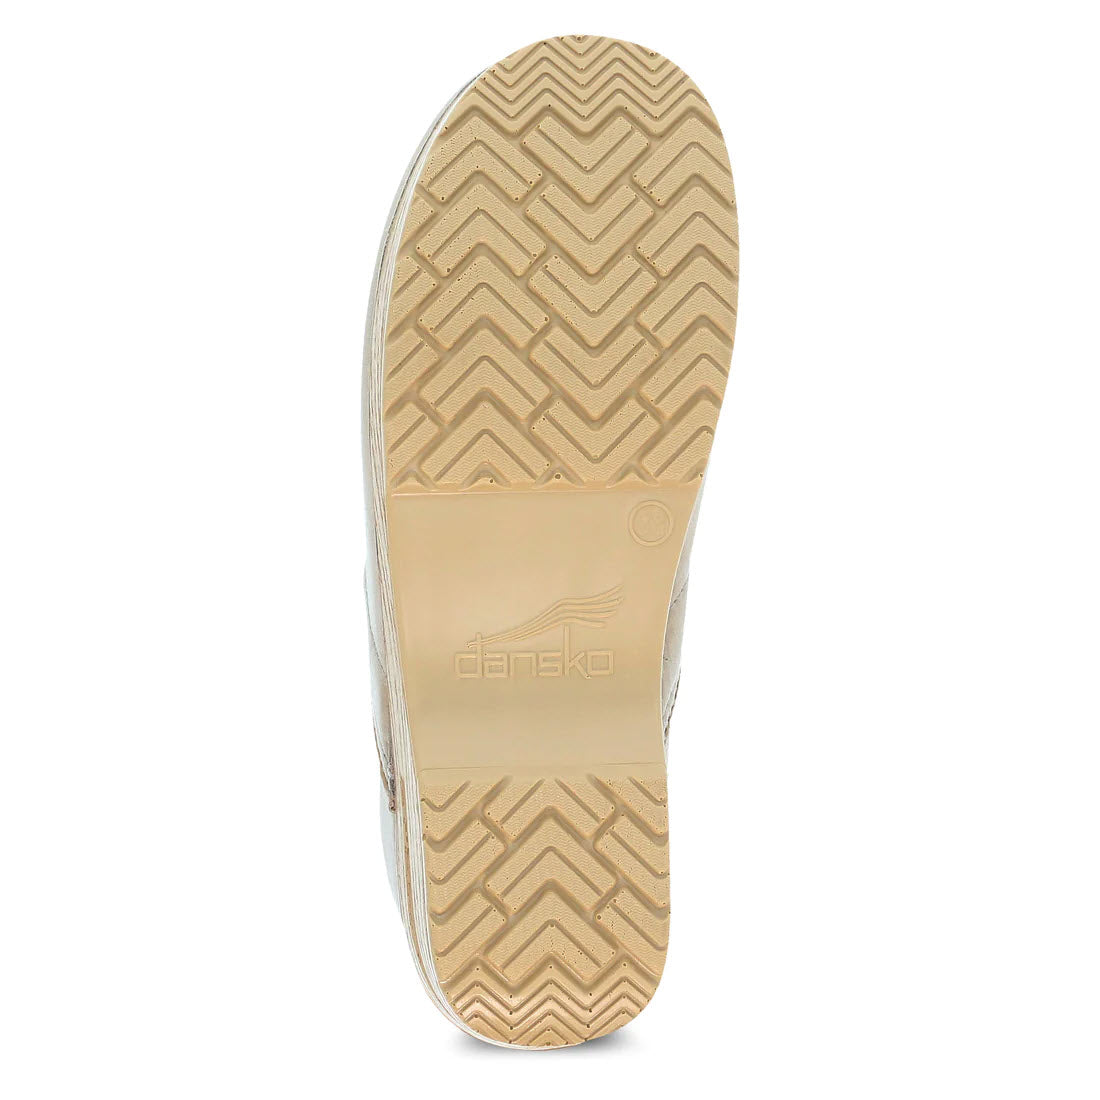 A sole of a Dansko Professional clog with a chevron tread pattern and the brand &quot;dansko&quot; visible.